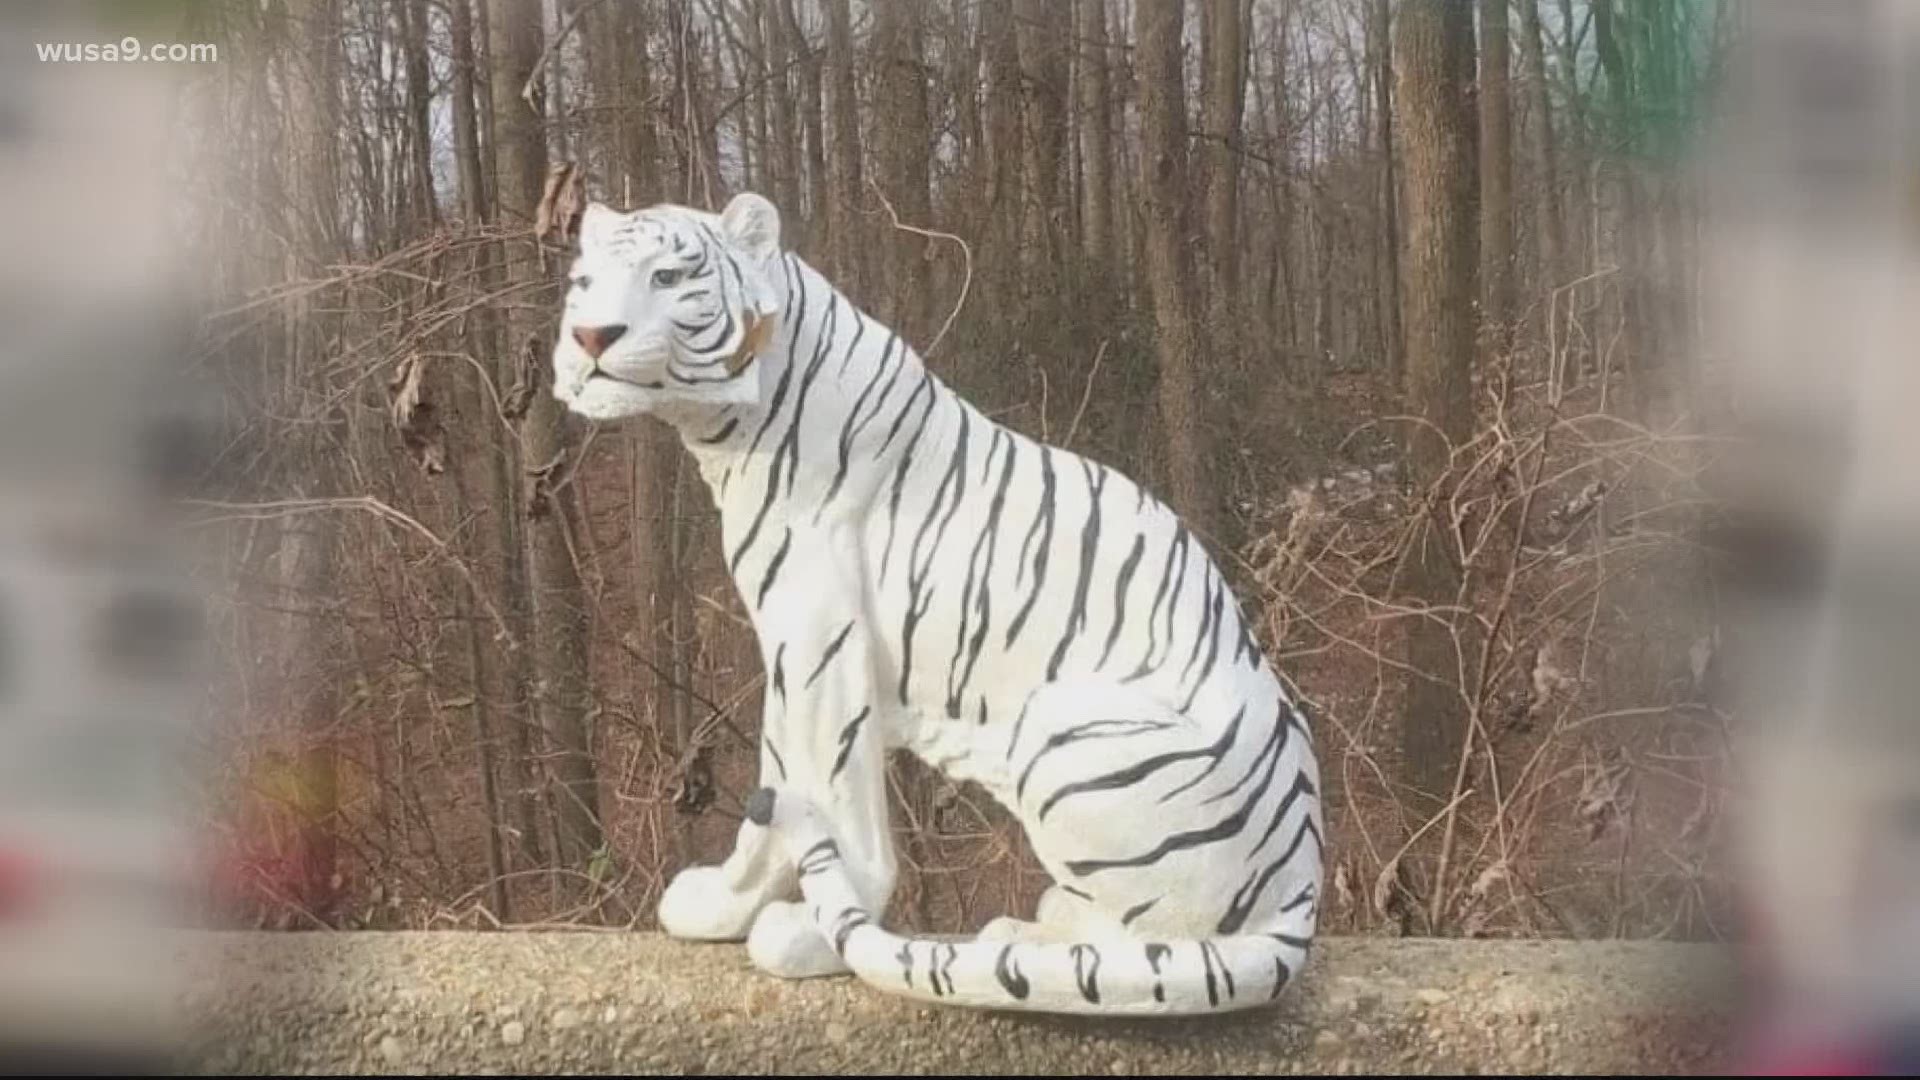 The plastic lifelike looking white tiger had some drivers on I-270 shocked as they rode down the interstate on Saturday.